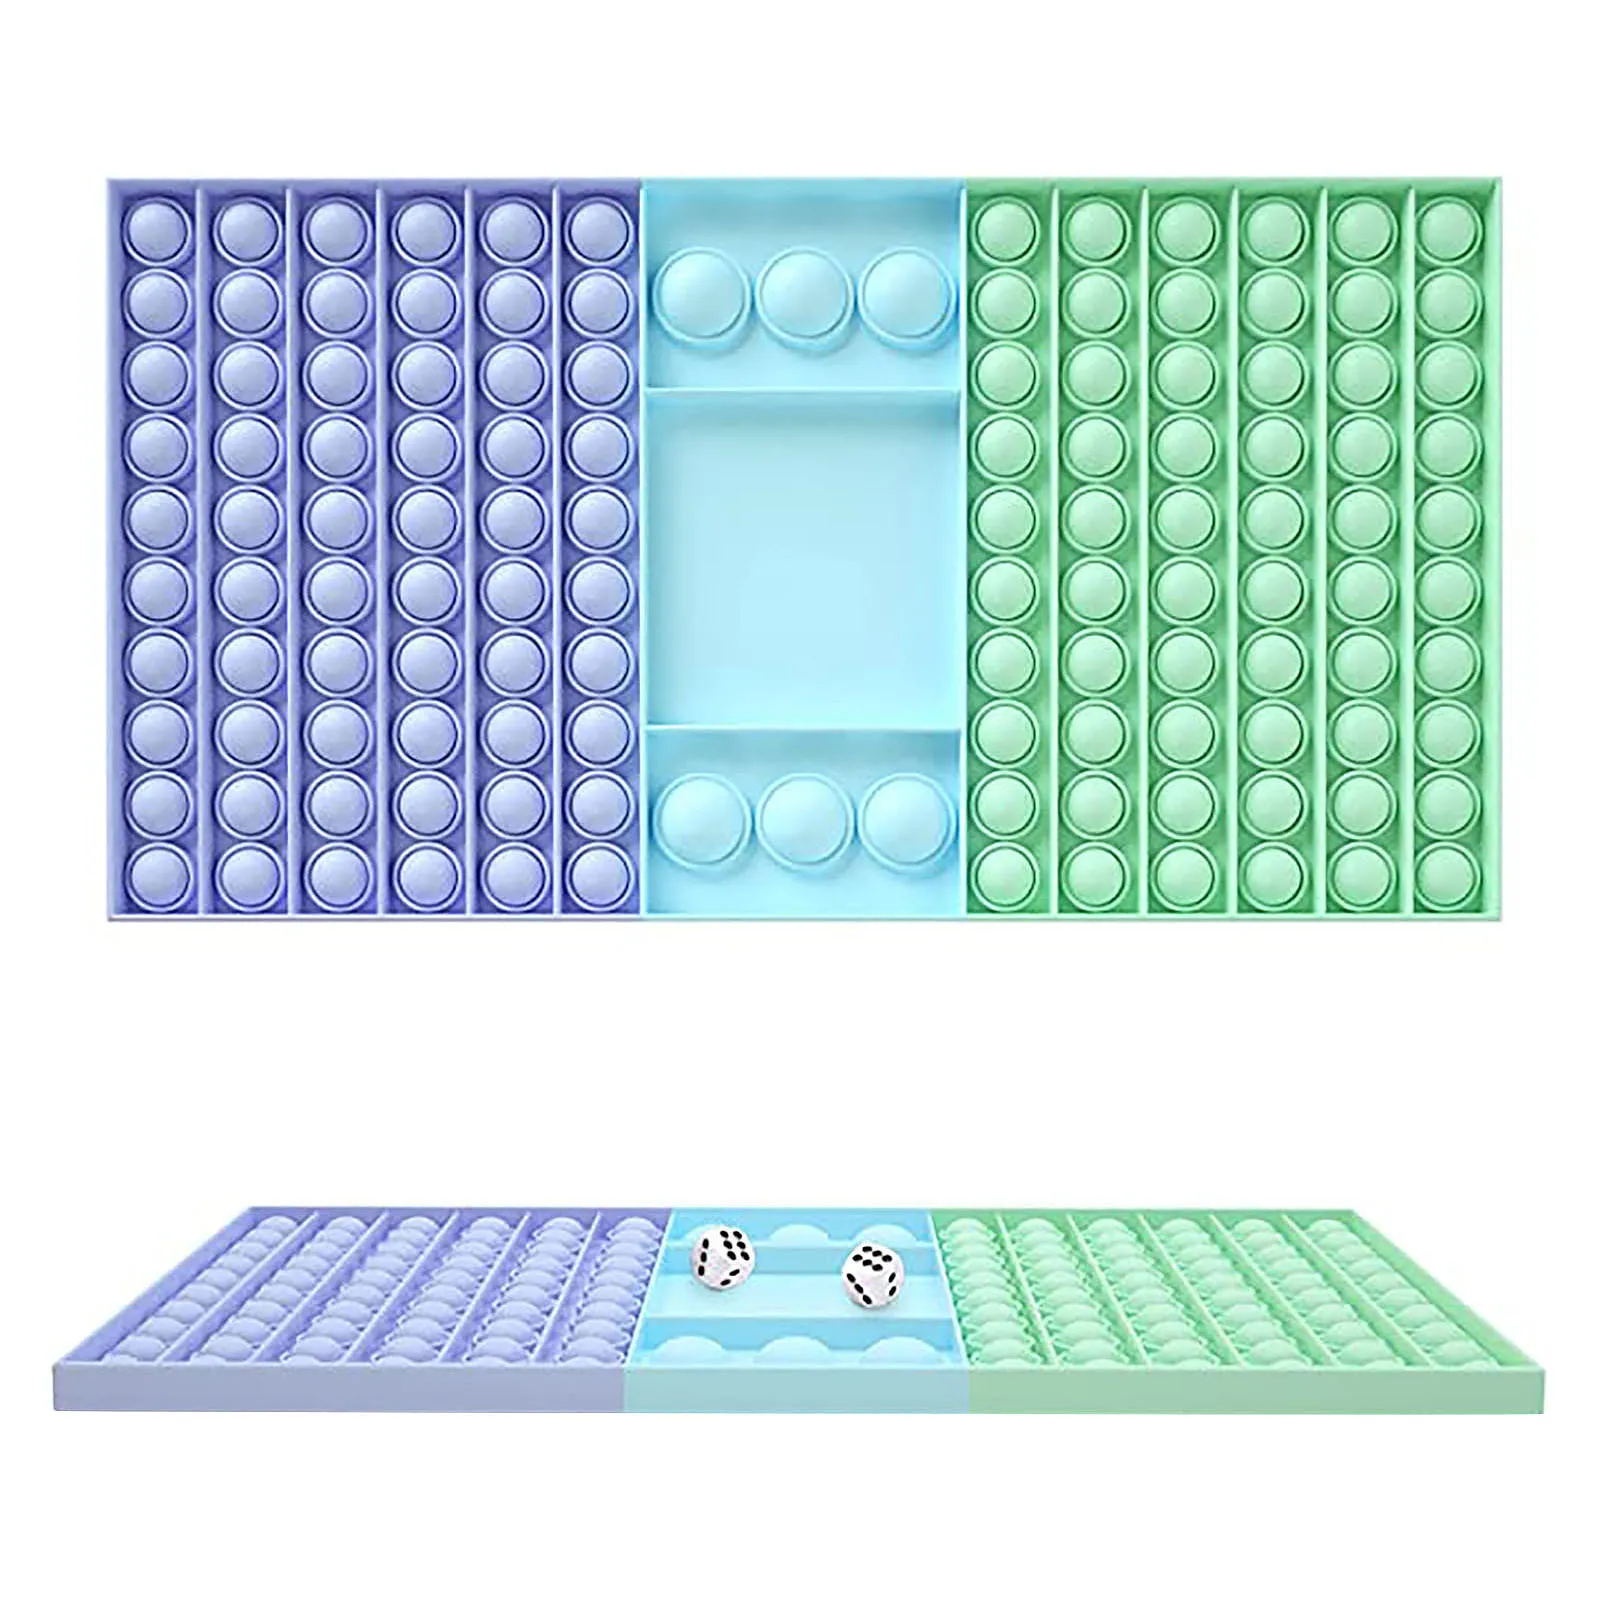 new big size pops fidget toys push for family gathering hot adult stress relief toy pop family table board games gifts free global shipping